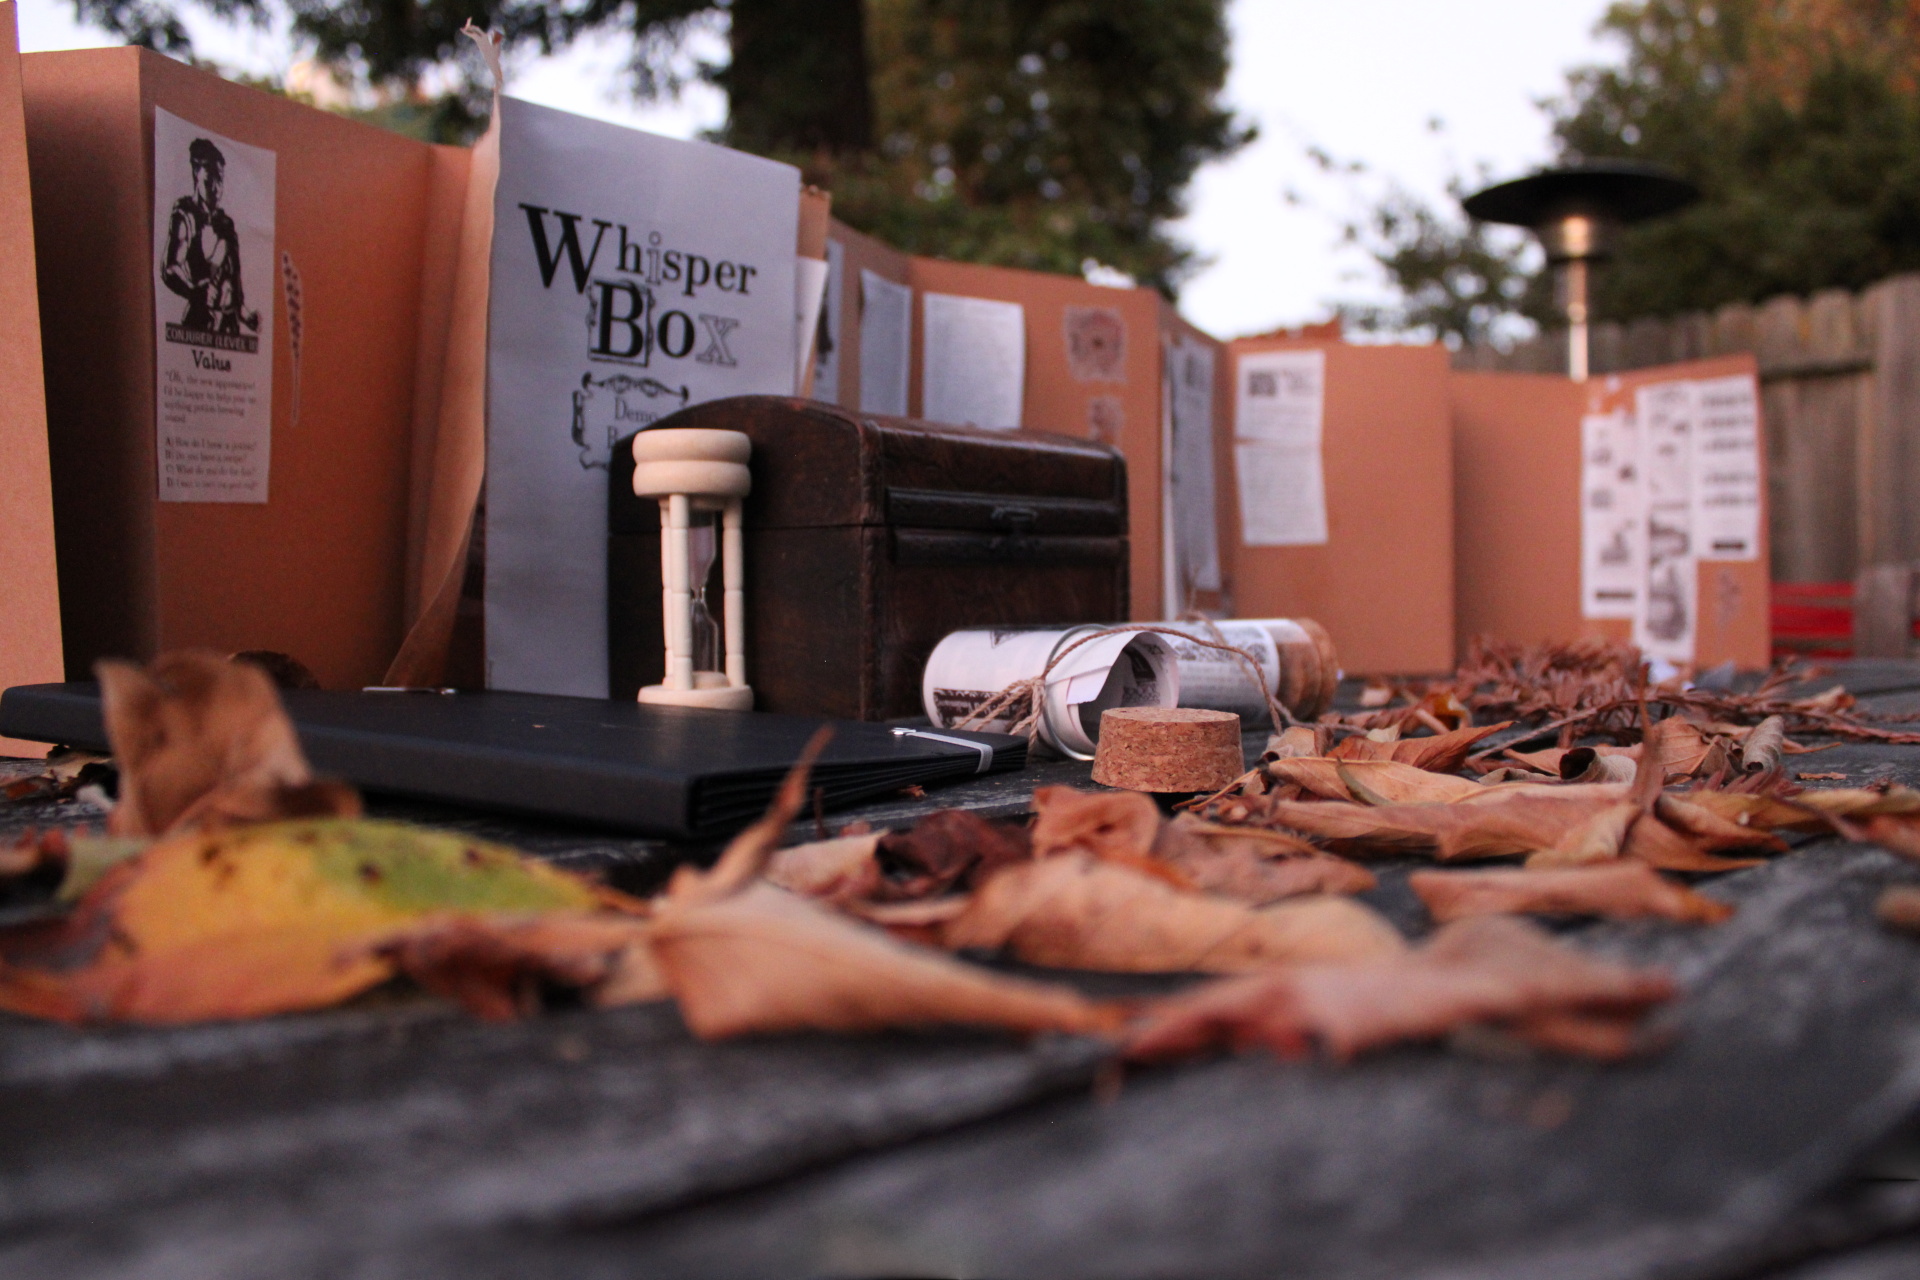 WhisperBox prototype in a cozy fall scene showing the screen-free good life in a backyard in Berkeley